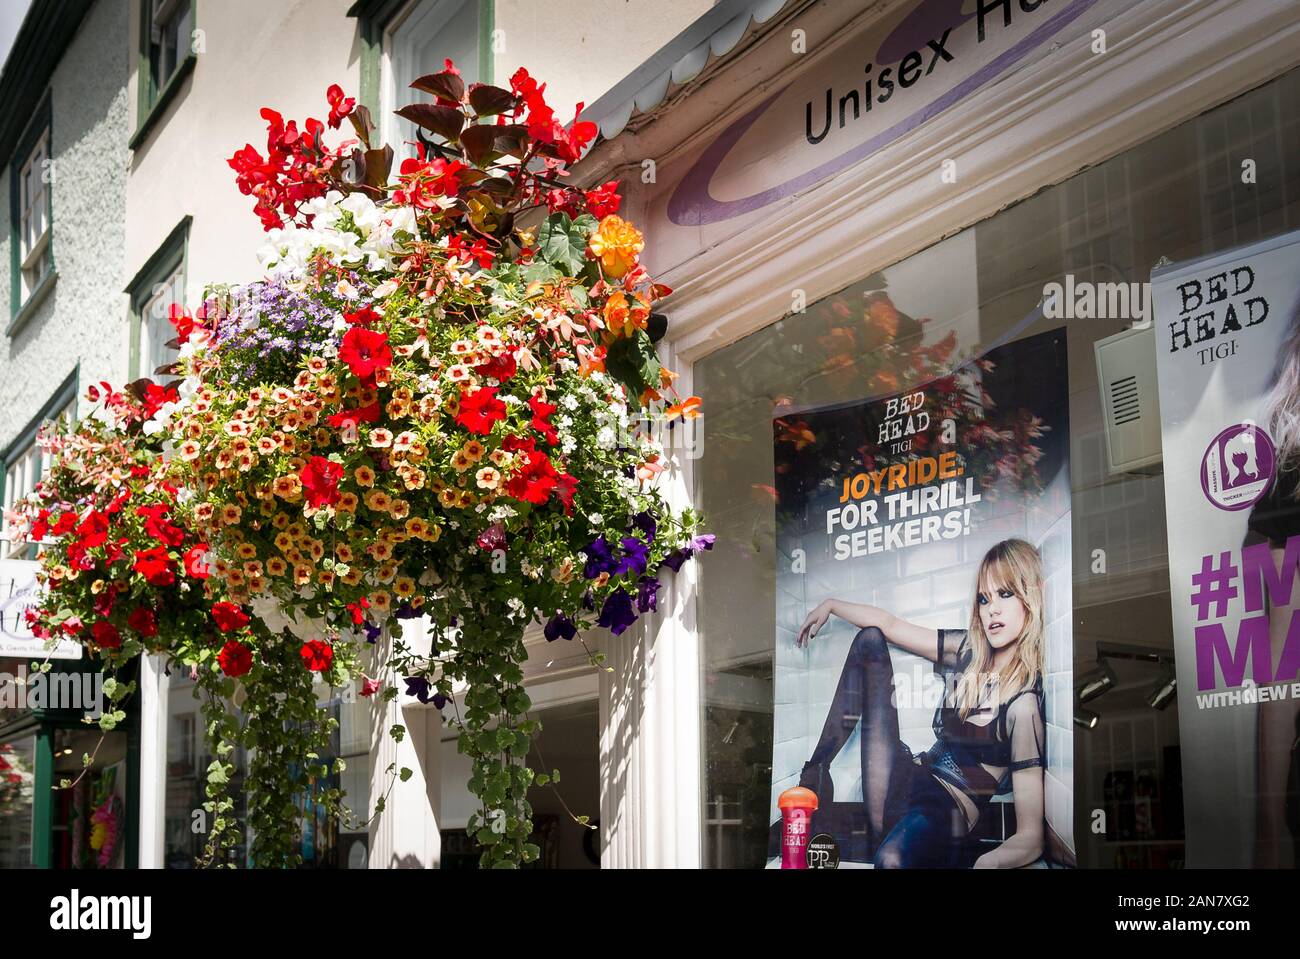 A hanging basket of annual flowers form part of the urban floral display in Devizes Wiltshire England UK Stock Photo